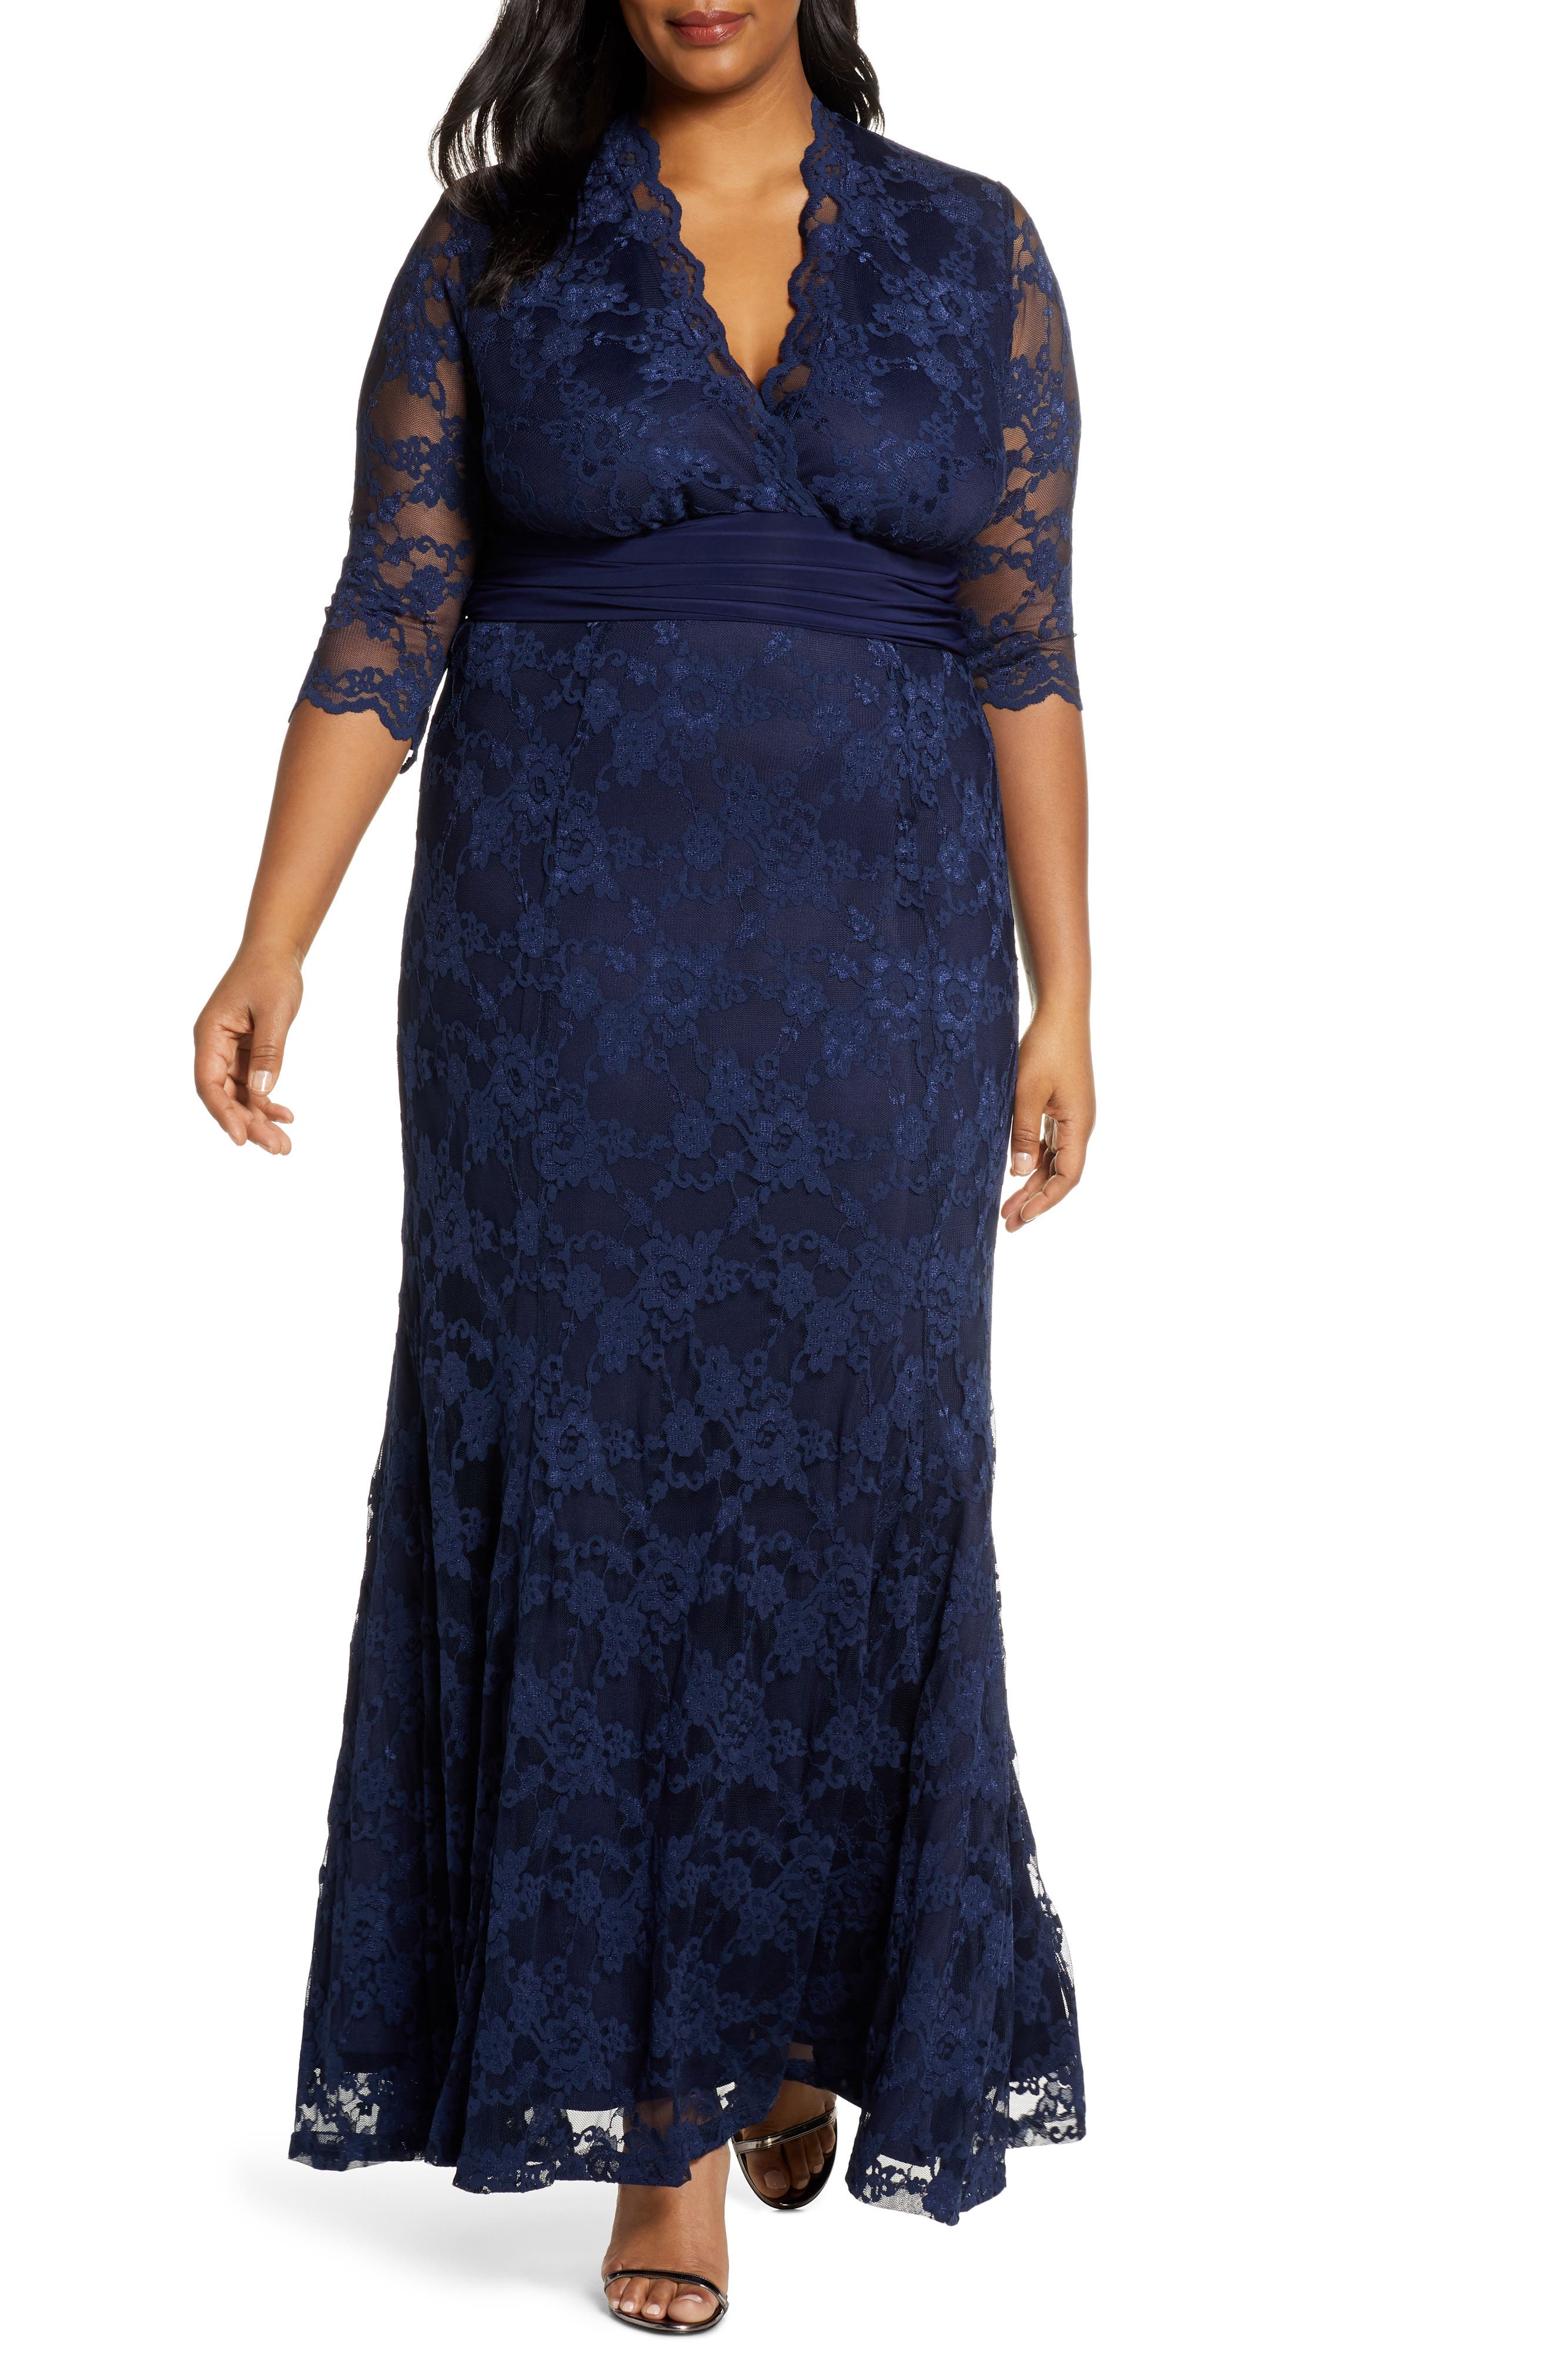 casual plus size dresses for a wedding